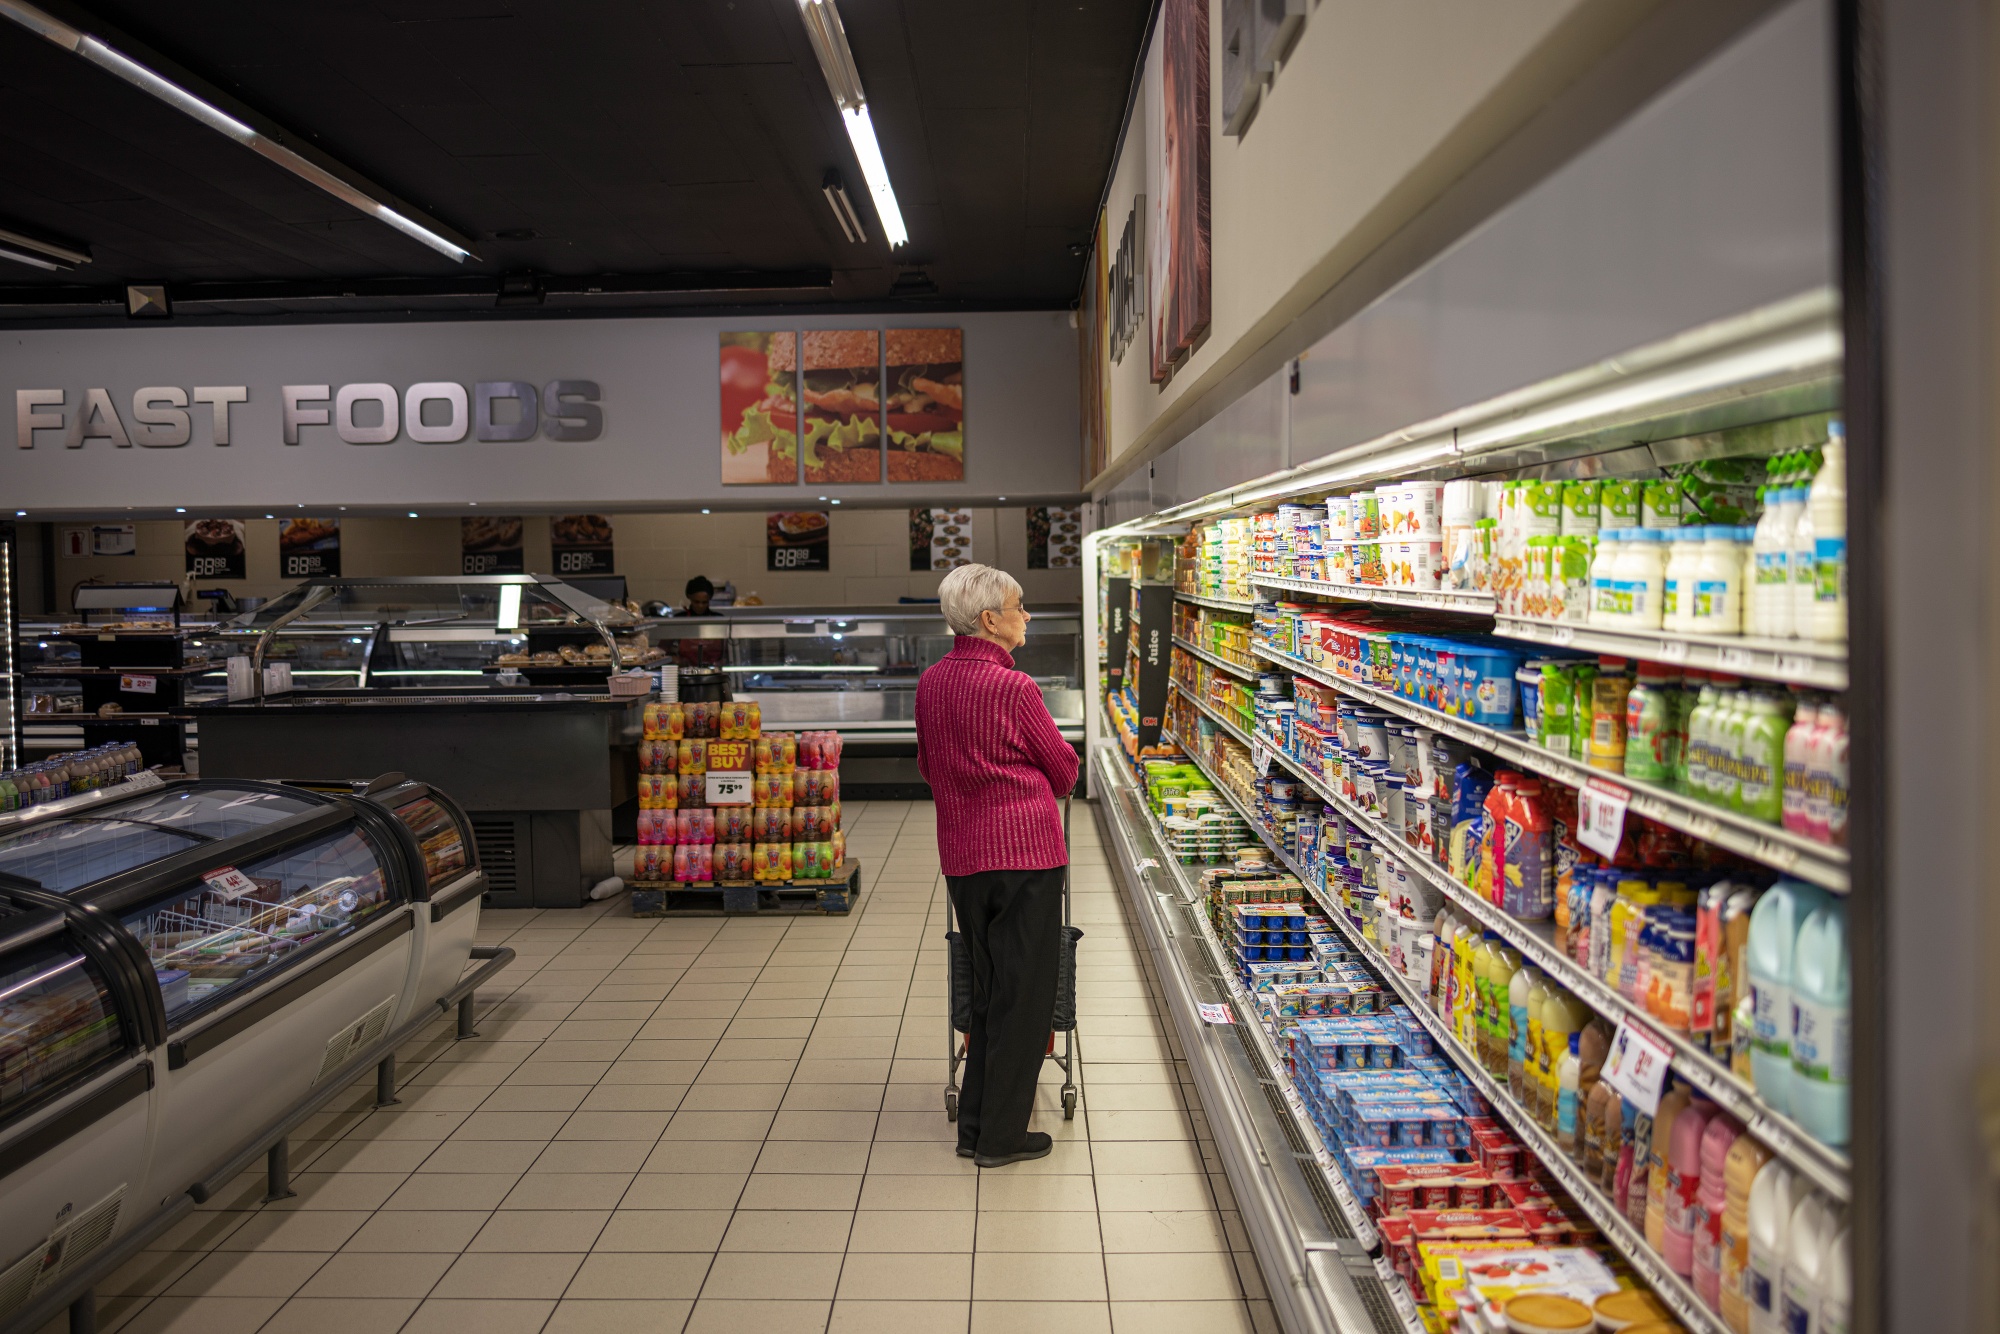 A customer browses products at a supermarket in Frankfort, South Africa.